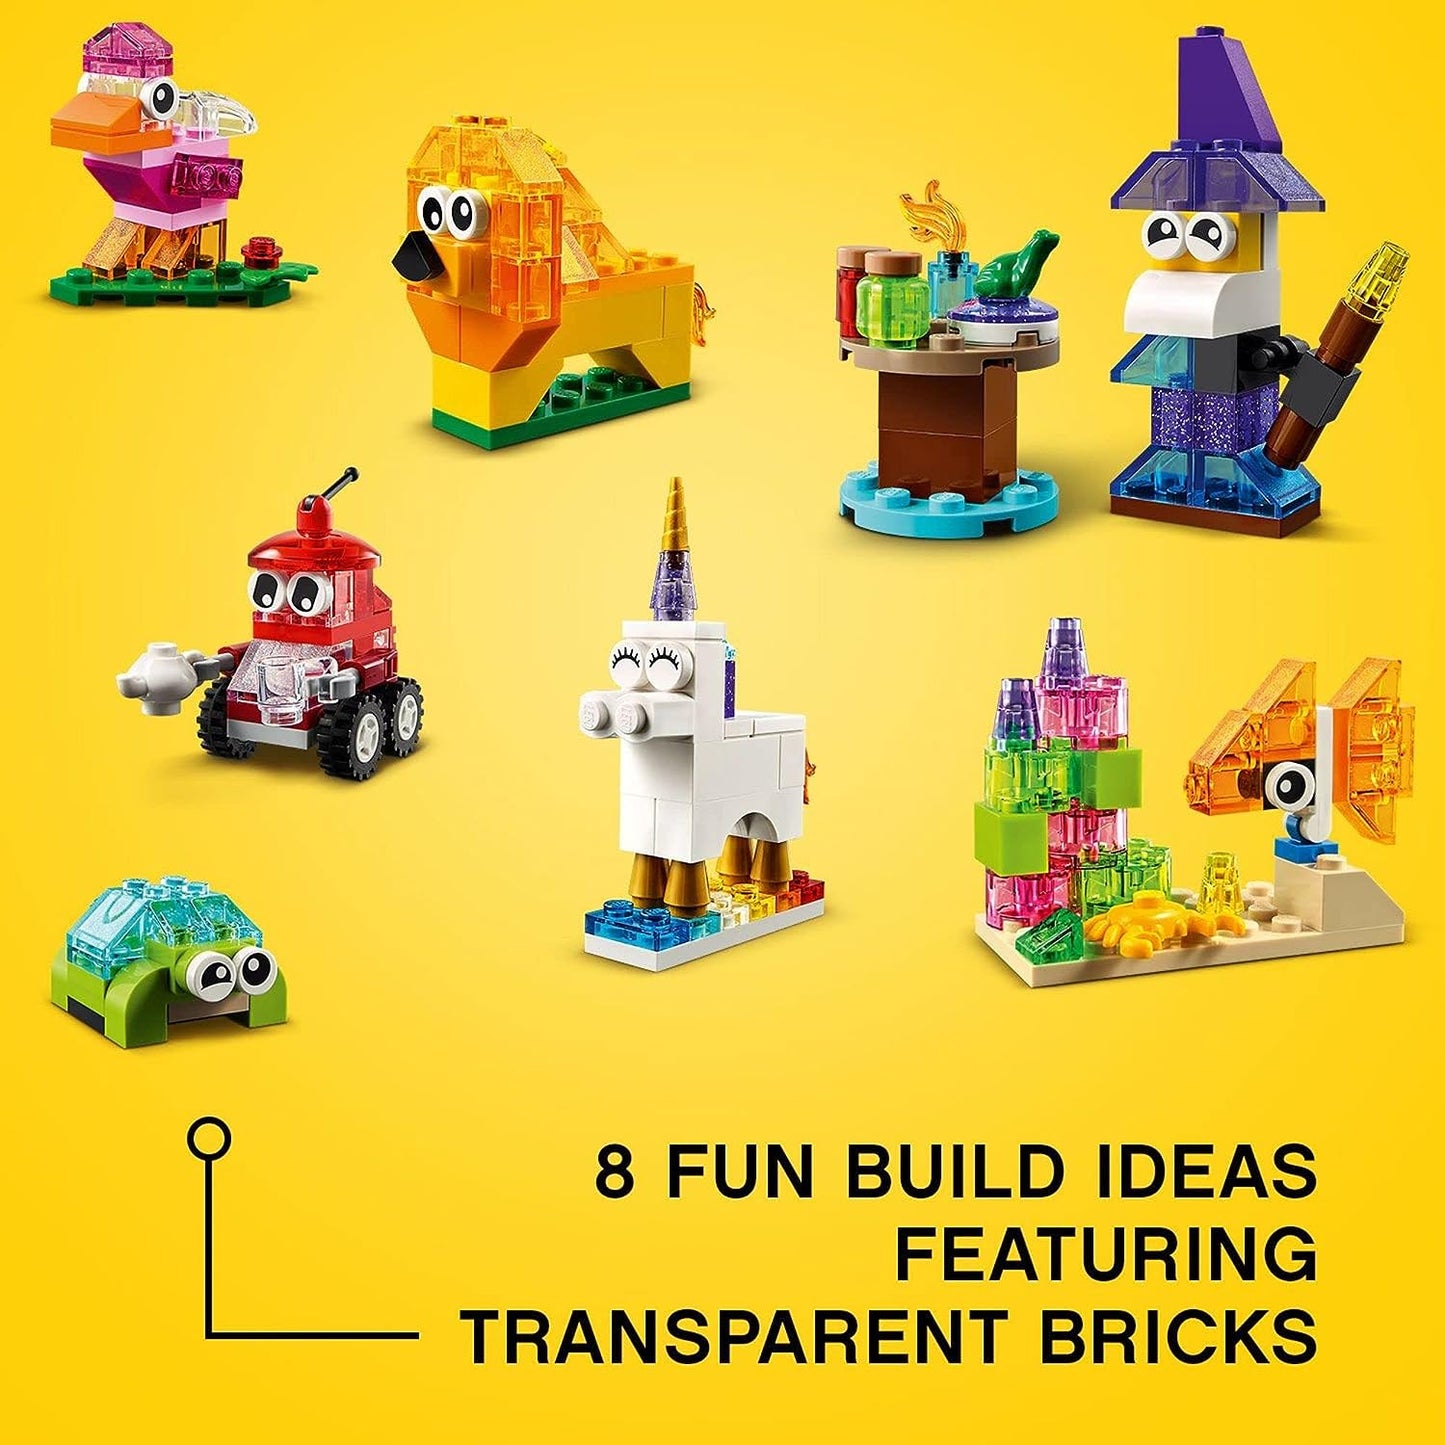 LEGO Classic Creative Transparent Bricks Building Set 11013 for Girls and Boys, STEM Toy and Preschool Hands-On Learning Toy, Includes Wizard, Unicorn, Lion, Bird, and Turtle